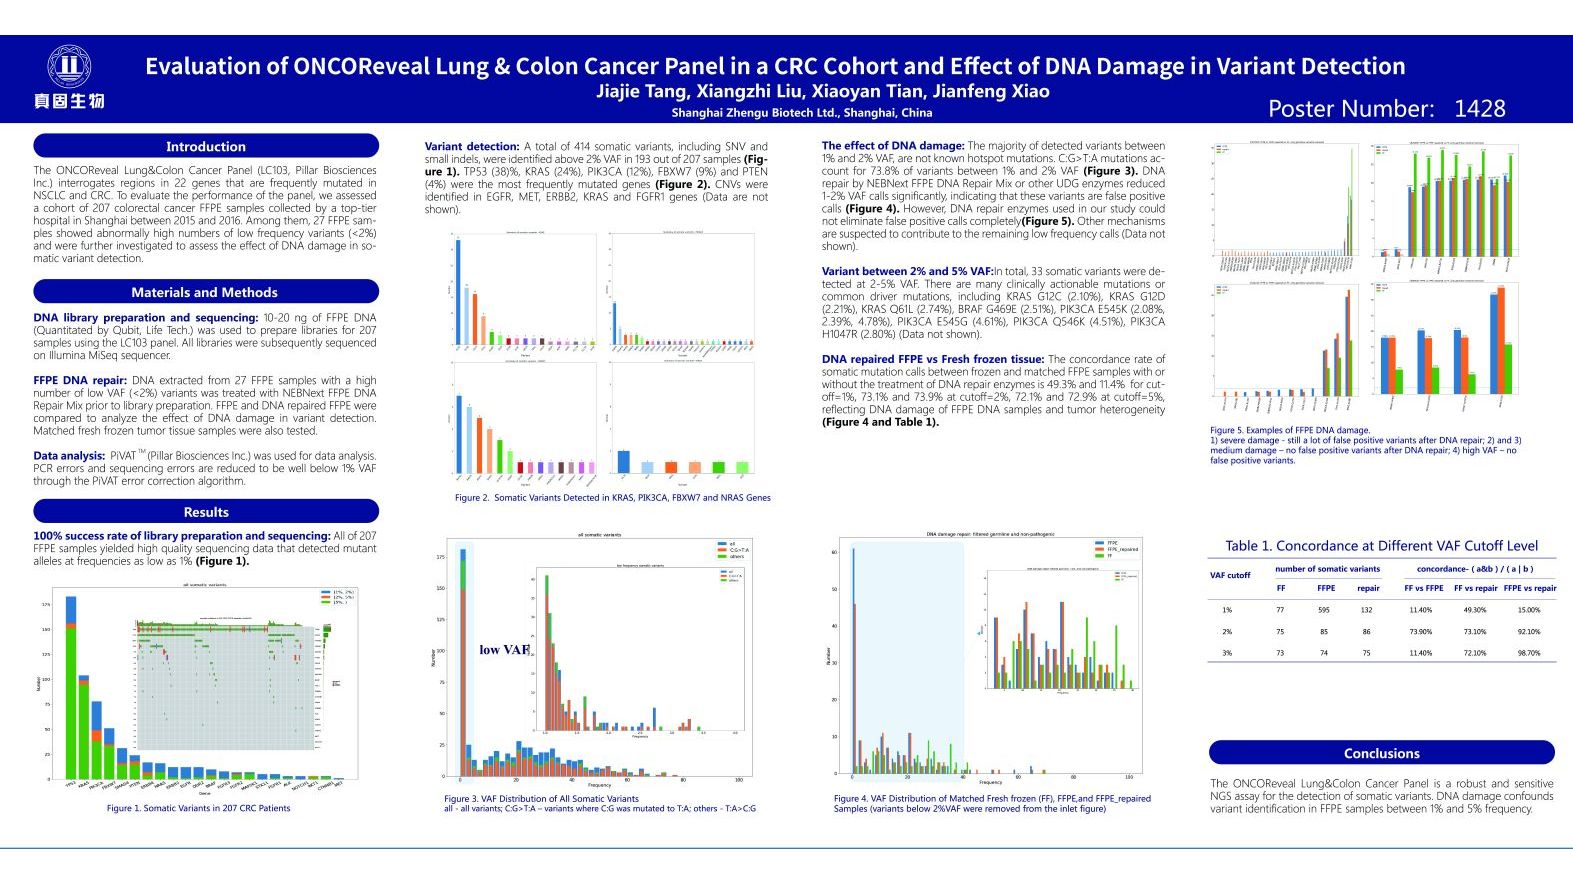 Screenshot of the Evaluation of ONCOReveal Lung & Colon Cancer Panel in a CRC Cohort and EFfect of DNA Damage in Variant Detection poster from AACR Hong Kong